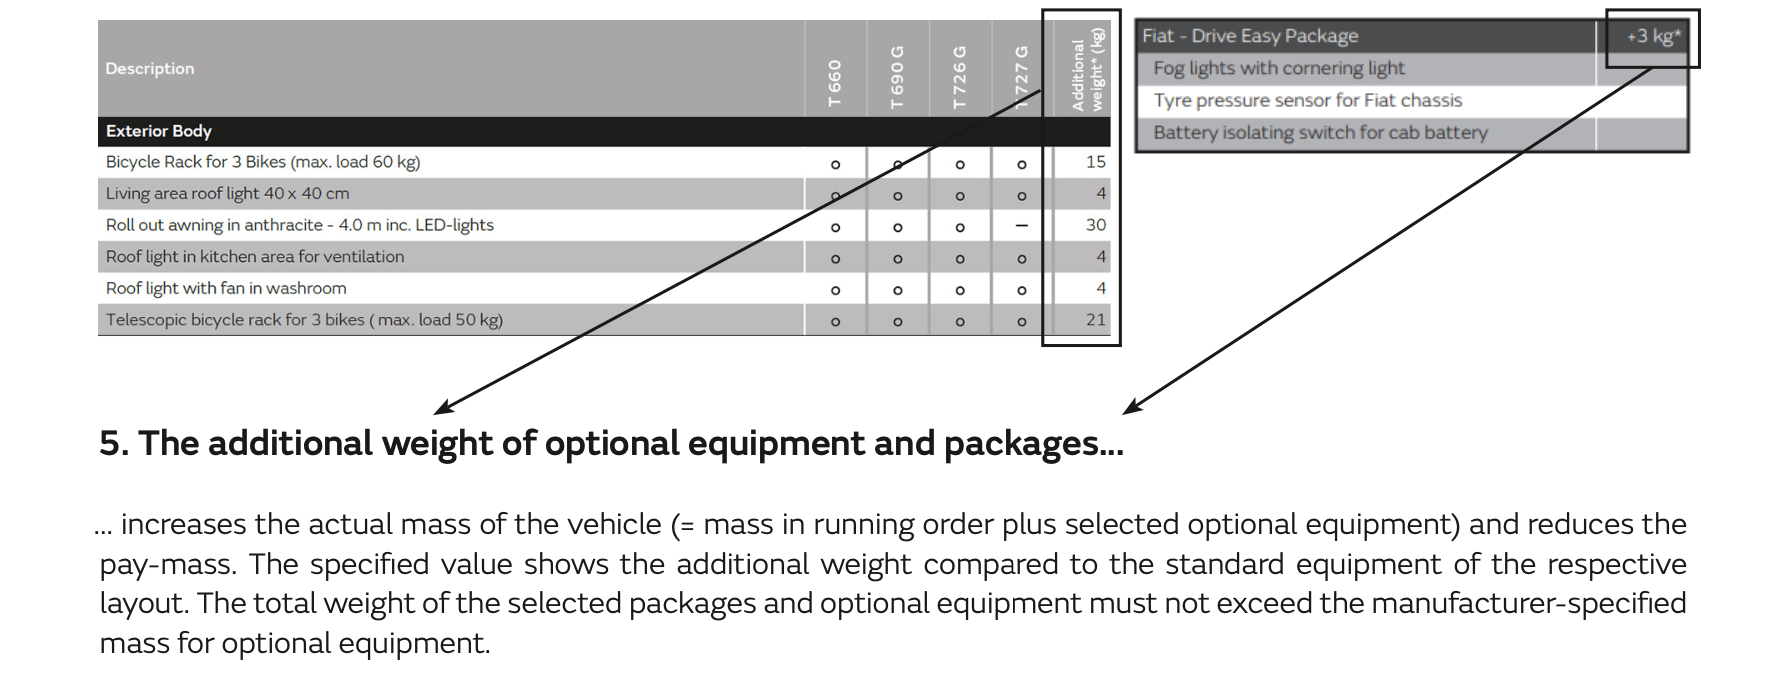 5. The additional weight of optional equipment and packages... ... increases the actual mass of the vehicle (= mass in running order plus selected optional equipment) and reduces the pay-mass. The specified value shows the additional weight compared to the standard equipment of the respective layout. The total weight of the selected packages and optional equipment must not exceed the manufacturer-specified mass for optional equipment.